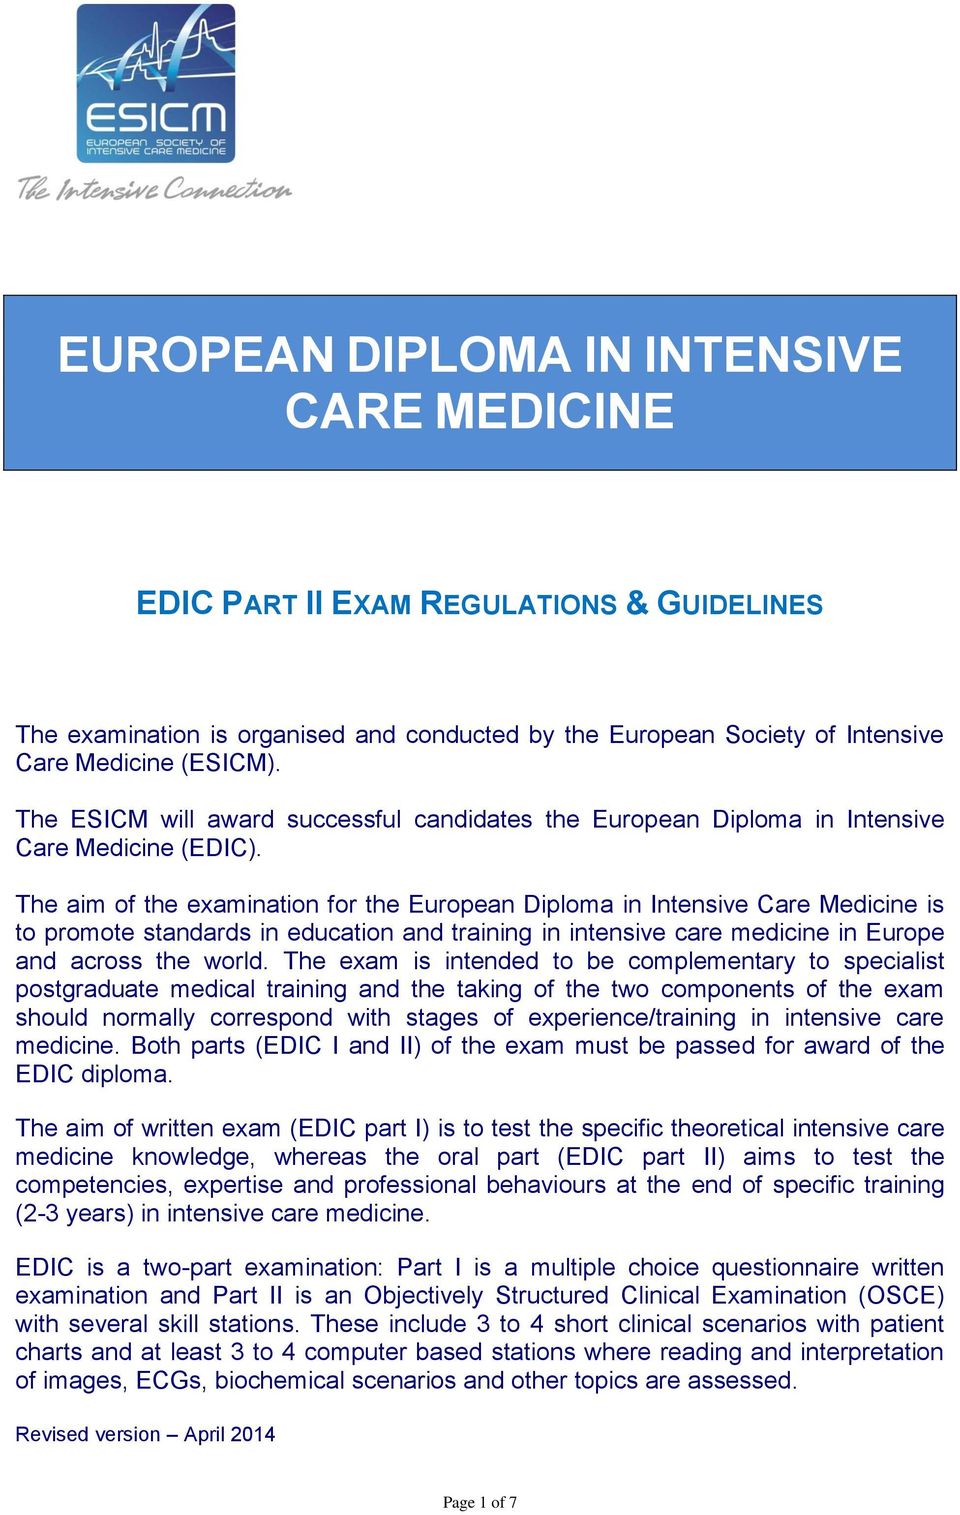 The aim of the examination for the European Diploma in Intensive Care Medicine is to promote standards in education and training in intensive care medicine in Europe and across the world.